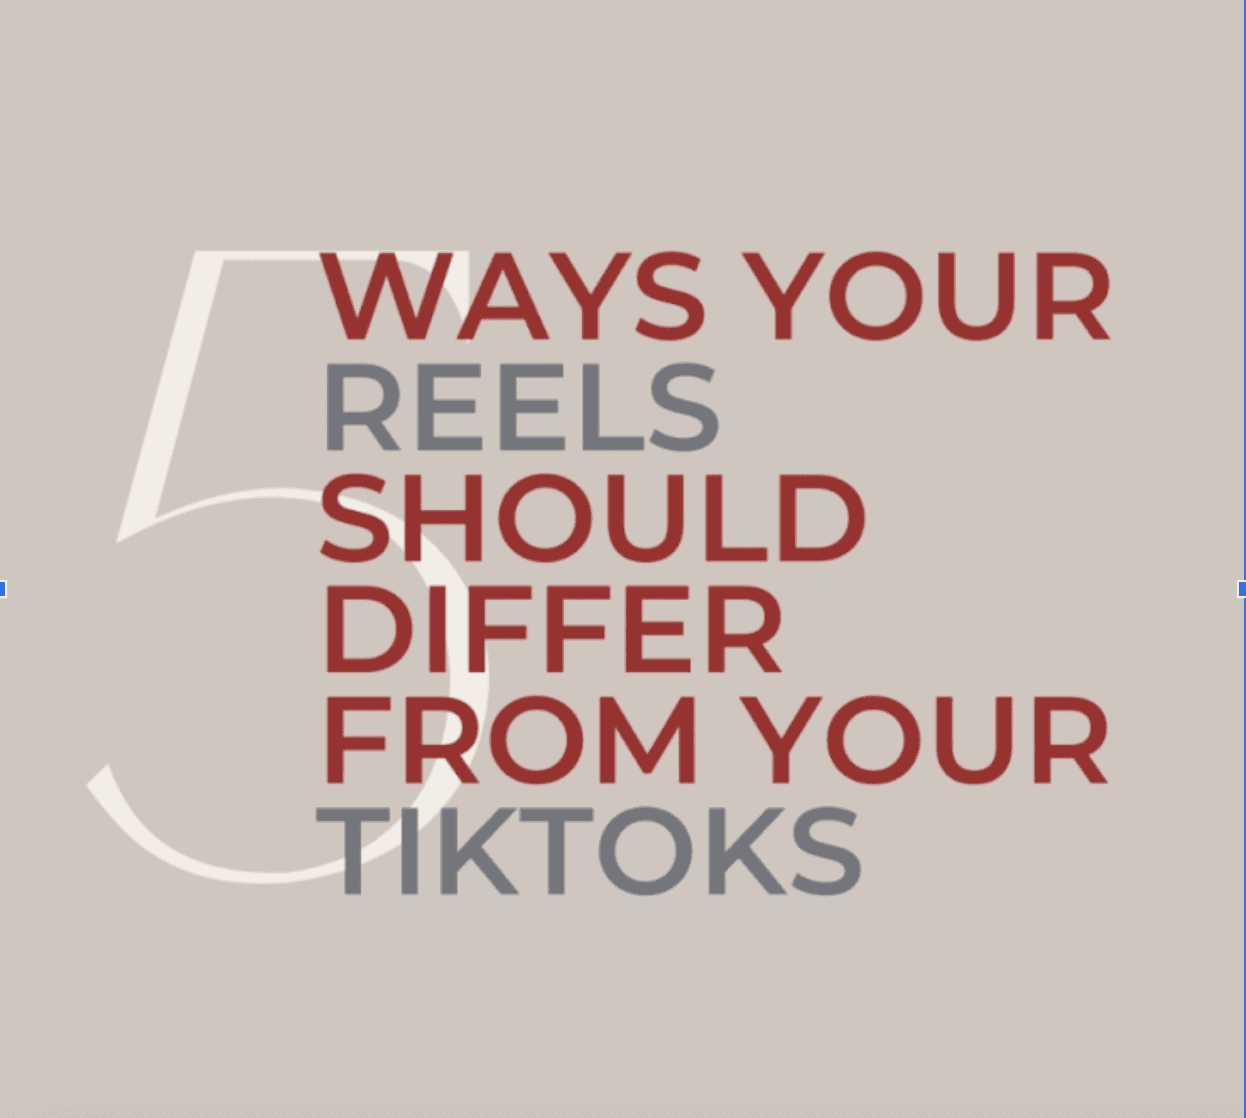 Five ways your Instagram reels should differ from your TikToks